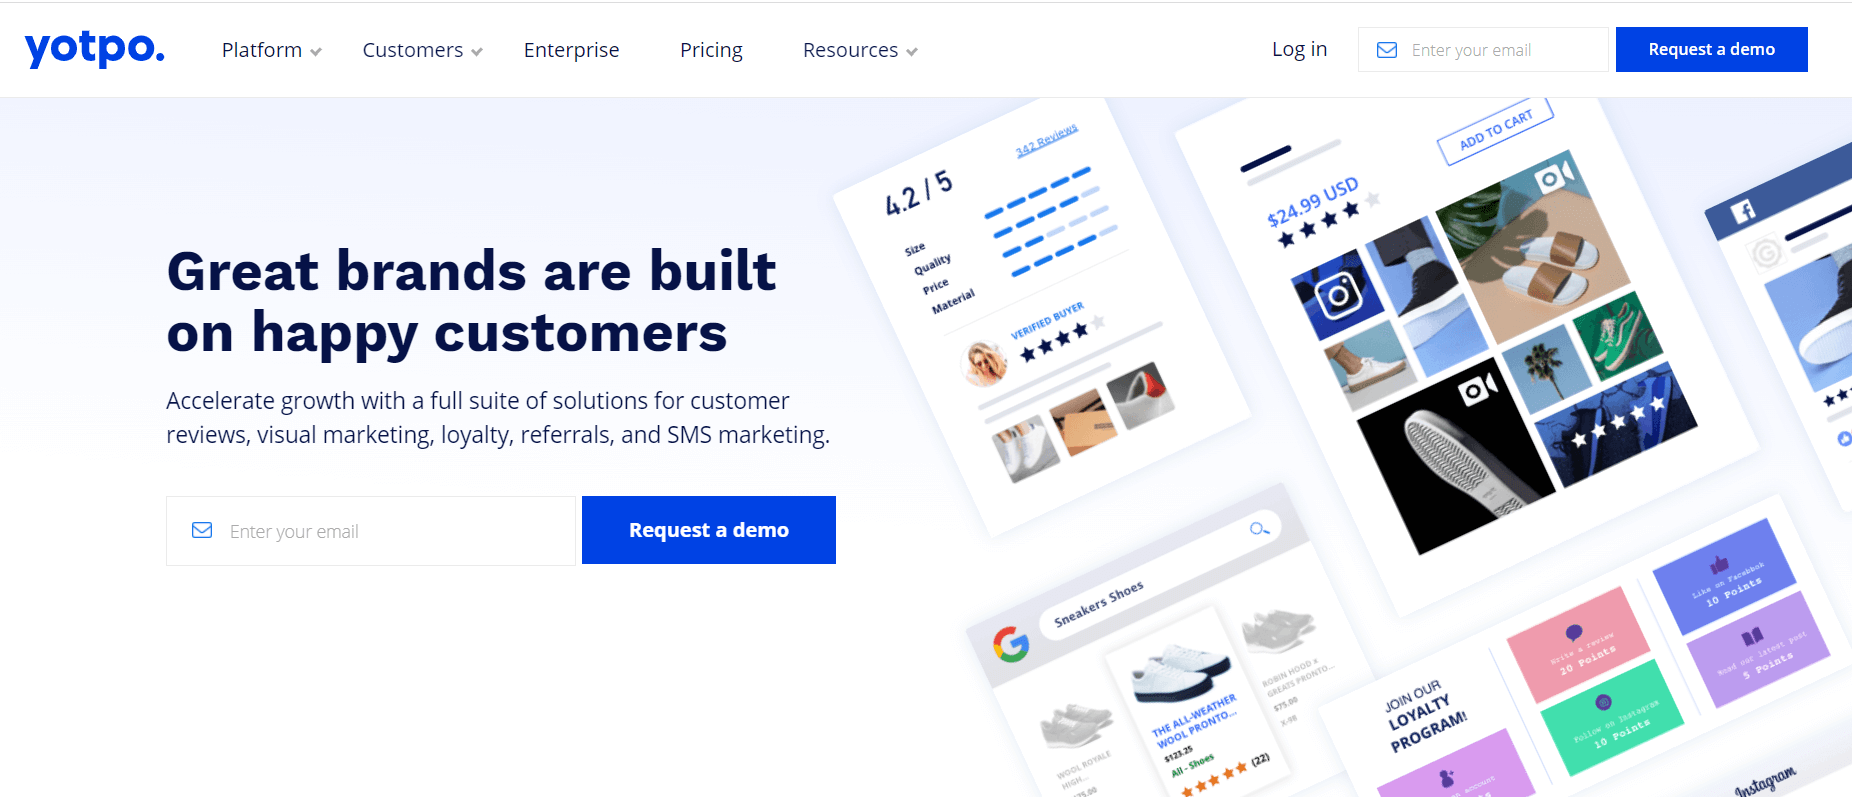 Yotpo homepage: Great brands are built on happy customers